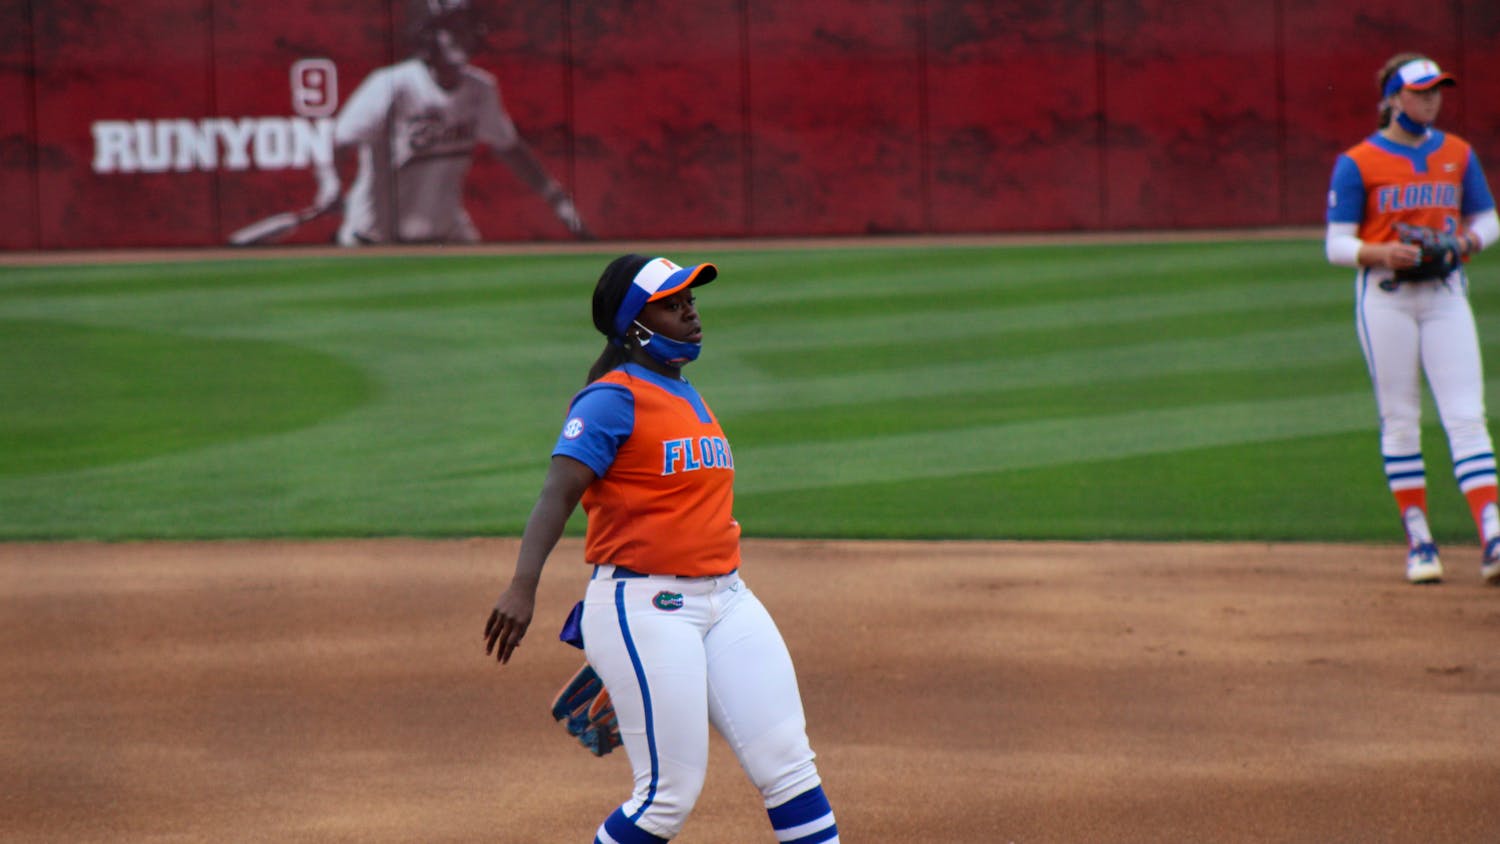 The Florida softball team ravaged DePaul University in a lopsided 11-3 victory in UCF Knights Friday. Photo from UF-Alabama game April 16.